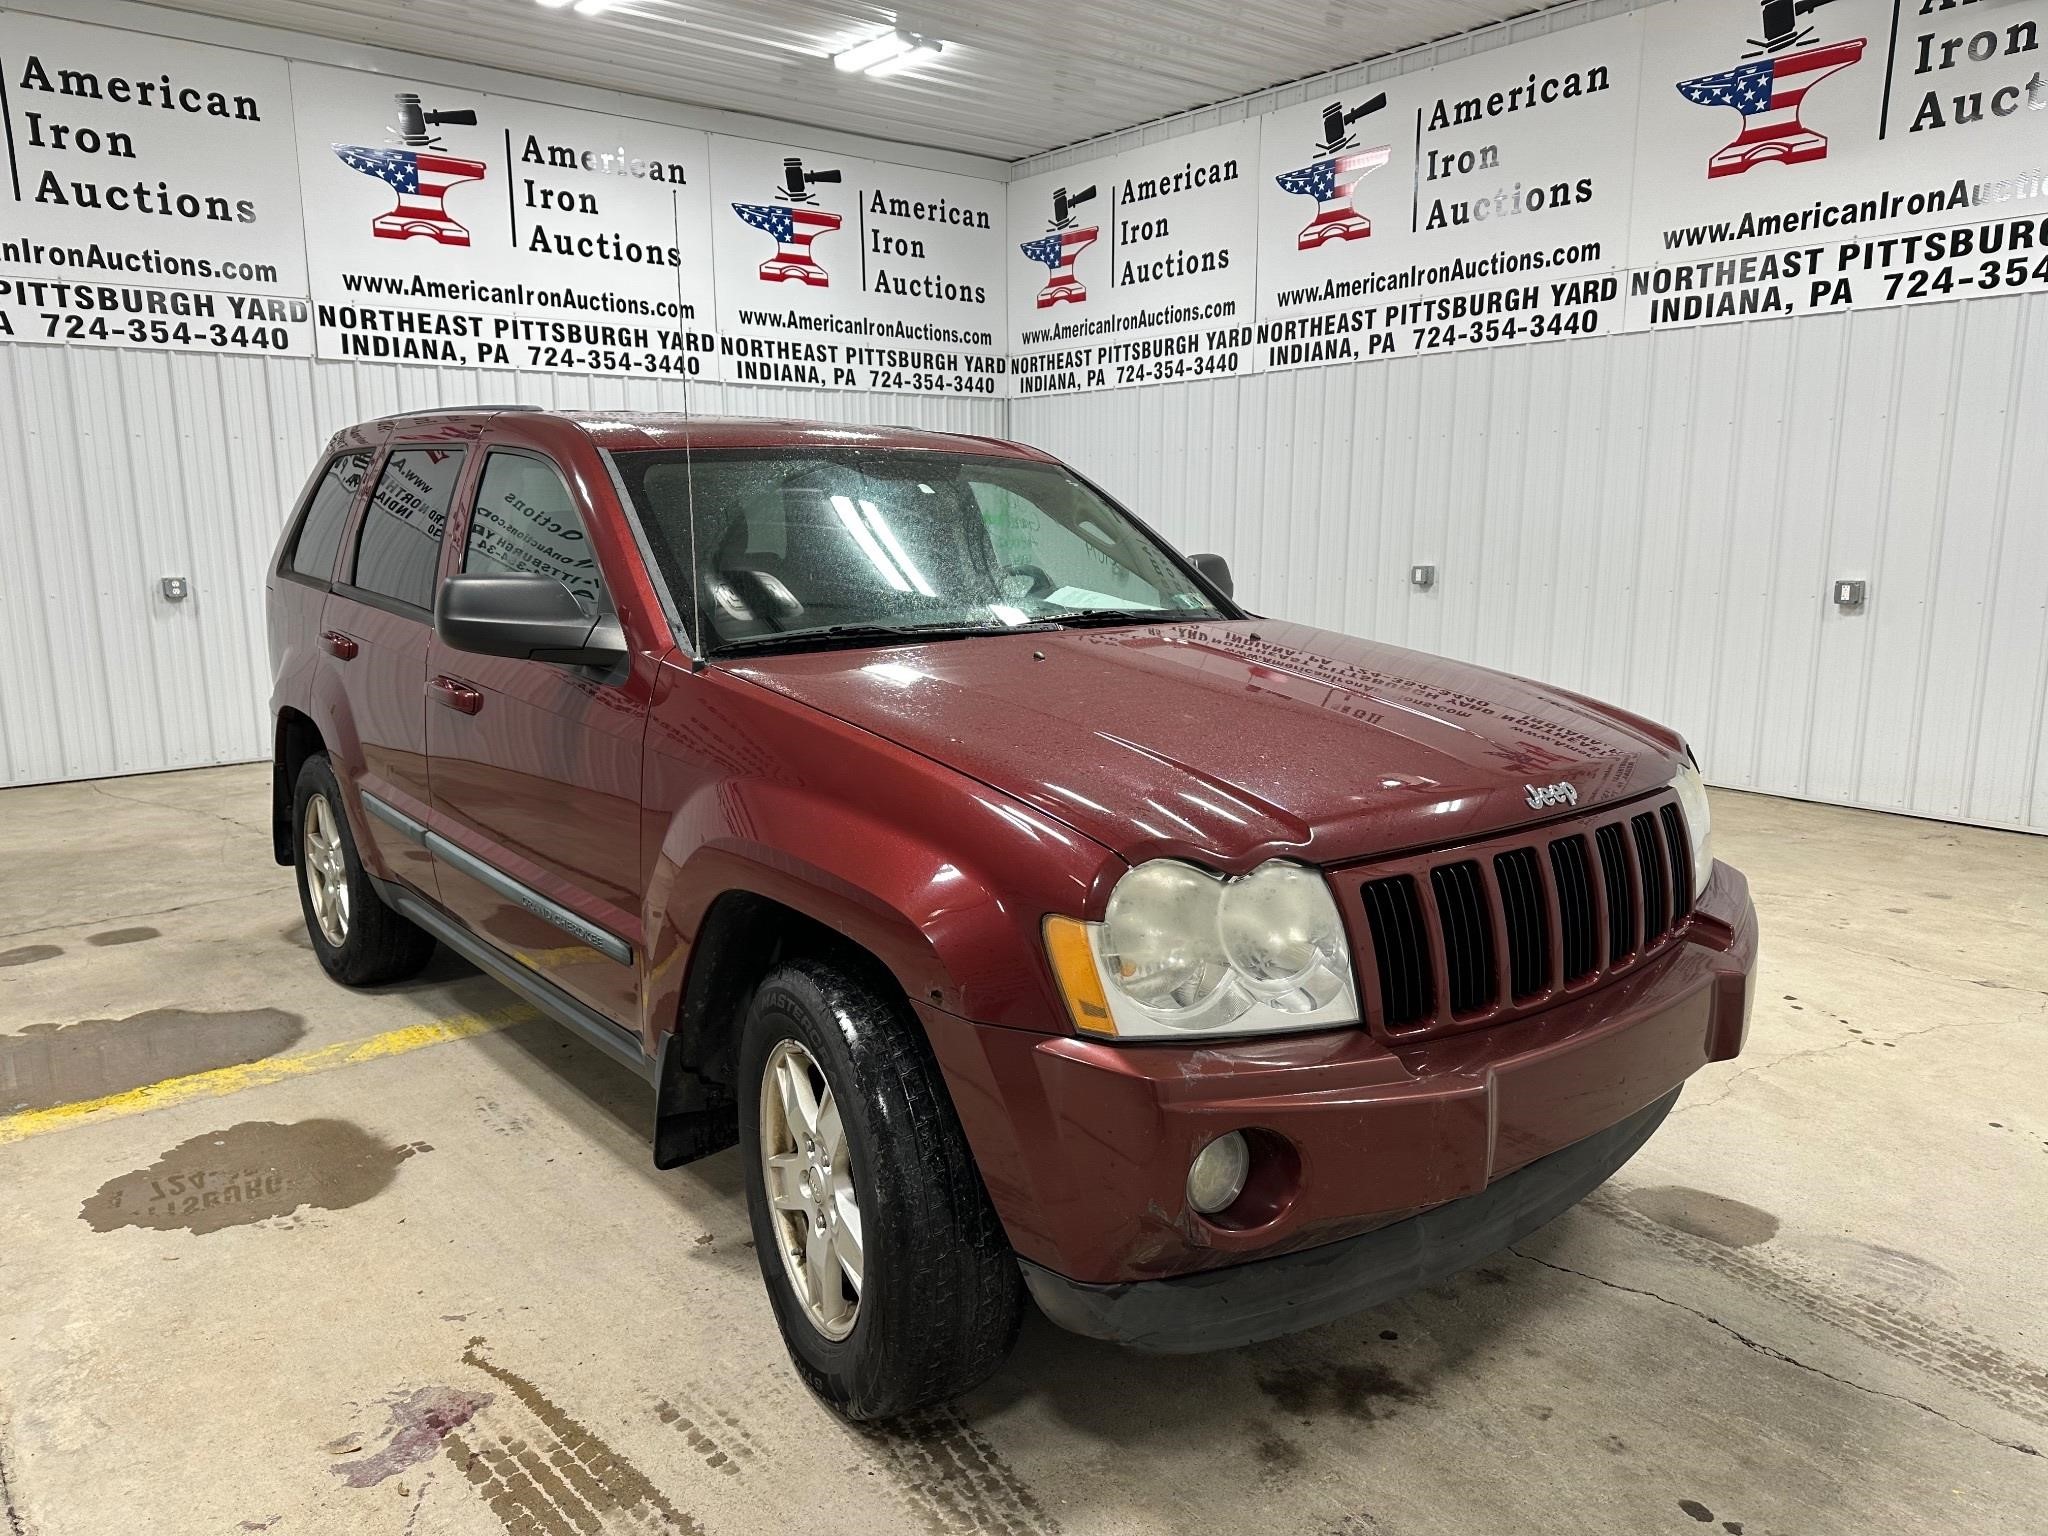 2007 Jeep Grand Cherokee SUV-Titled-NO RESERVE